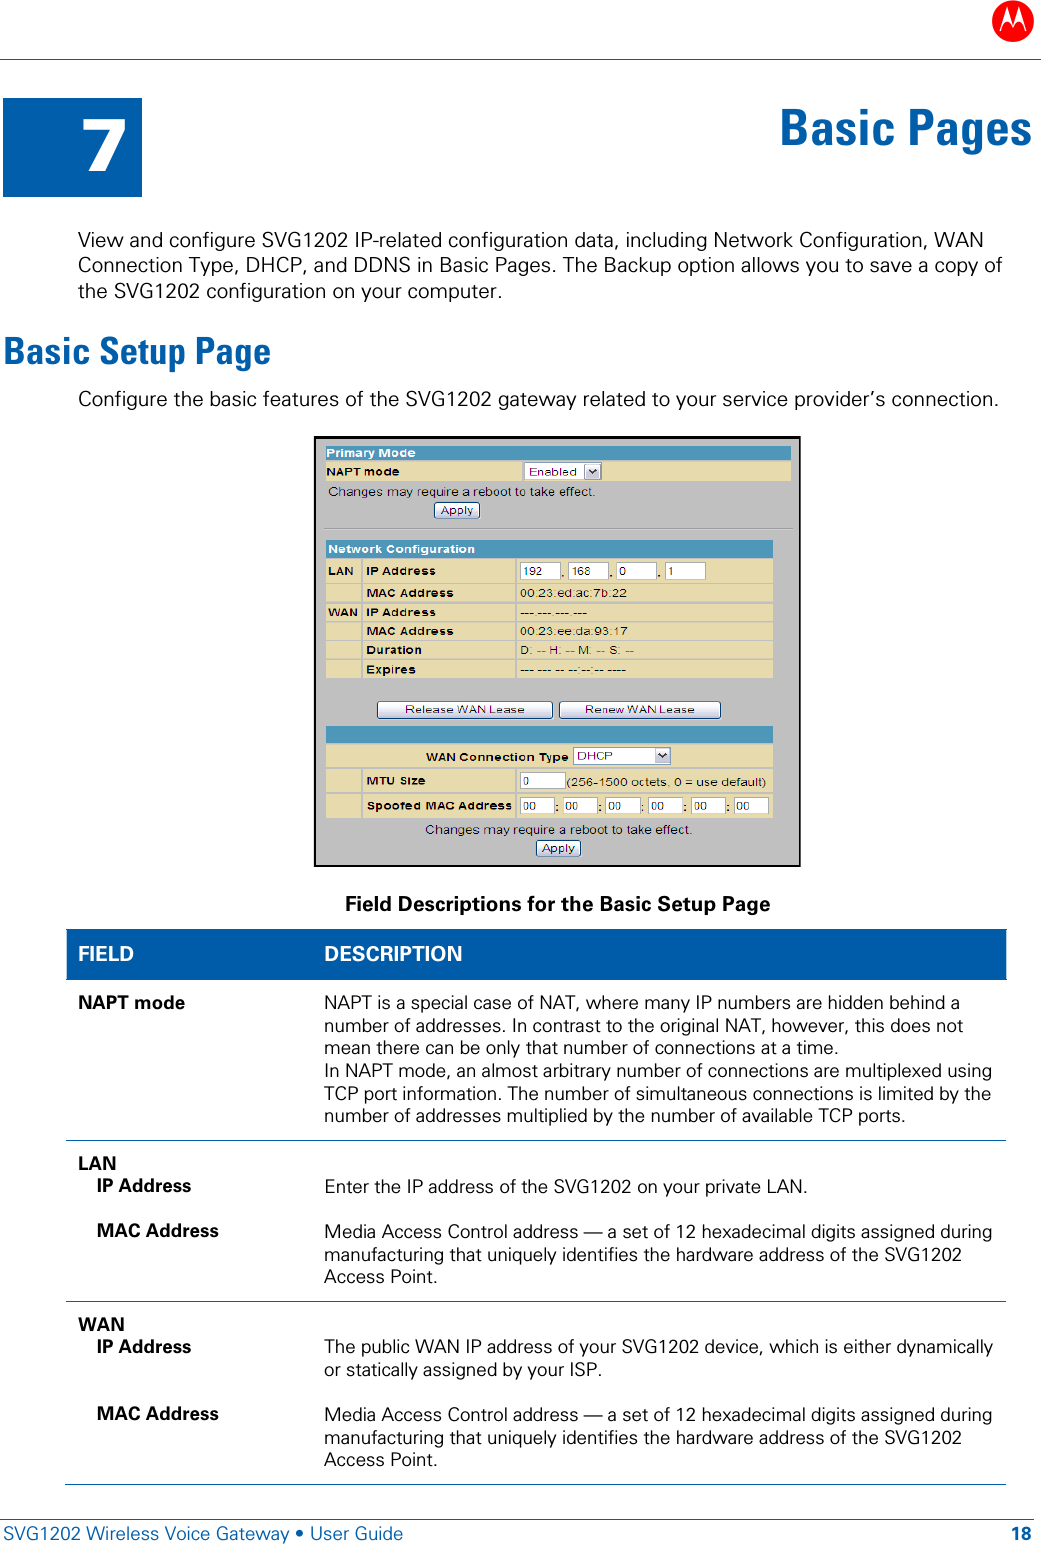 B   SVG1202 Wireless Voice Gateway • User Guide 18  7 Basic Pages  View and configure SVG1202 IP-related configuration data, including Network Configuration, WAN Connection Type, DHCP, and DDNS in Basic Pages. The Backup option allows you to save a copy of the SVG1202 configuration on your computer. Basic Setup Page Configure the basic features of the SVG1202 gateway related to your service provider’s connection.  Field Descriptions for the Basic Setup Page FIELD  DESCRIPTION NAPT mode NAPT is a special case of NAT, where many IP numbers are hidden behind a number of addresses. In contrast to the original NAT, however, this does not mean there can be only that number of connections at a time. In NAPT mode, an almost arbitrary number of connections are multiplexed using TCP port information. The number of simultaneous connections is limited by the number of addresses multiplied by the number of available TCP ports. LAN  IP Address  MAC Address  Enter the IP address of the SVG1202 on your private LAN.  Media Access Control address — a set of 12 hexadecimal digits assigned during manufacturing that uniquely identifies the hardware address of the SVG1202 Access Point. WAN IP Address   MAC Address    The public WAN IP address of your SVG1202 device, which is either dynamically or statically assigned by your ISP.  Media Access Control address — a set of 12 hexadecimal digits assigned during manufacturing that uniquely identifies the hardware address of the SVG1202 Access Point. 